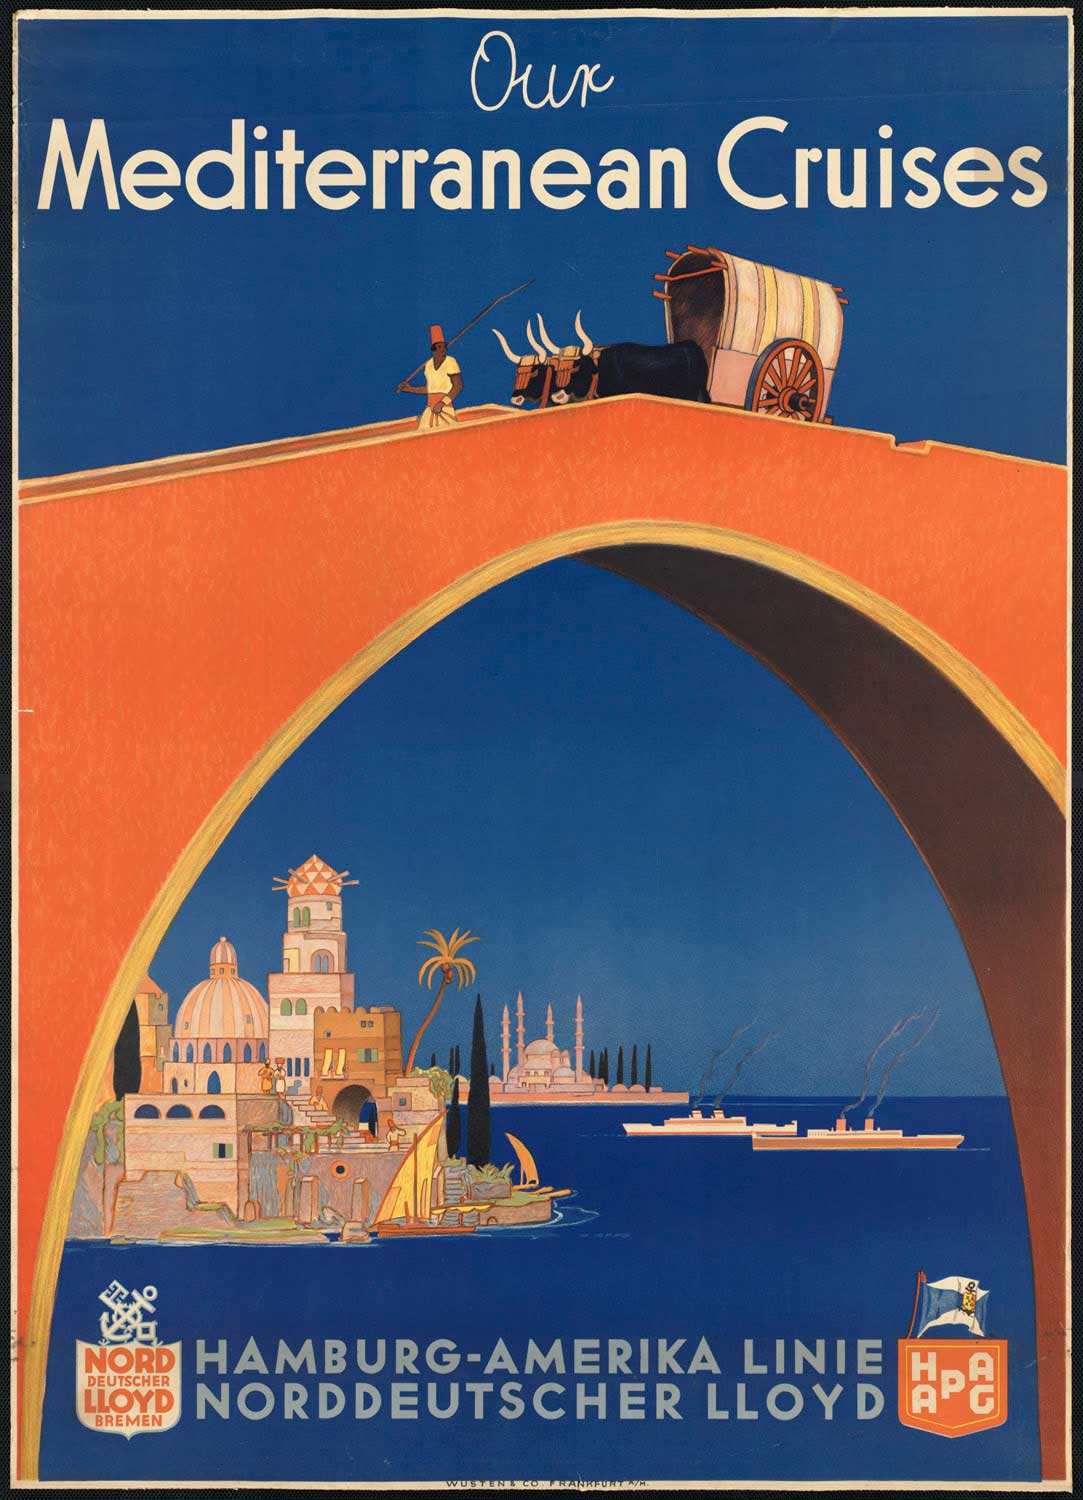 travel posters 1920s